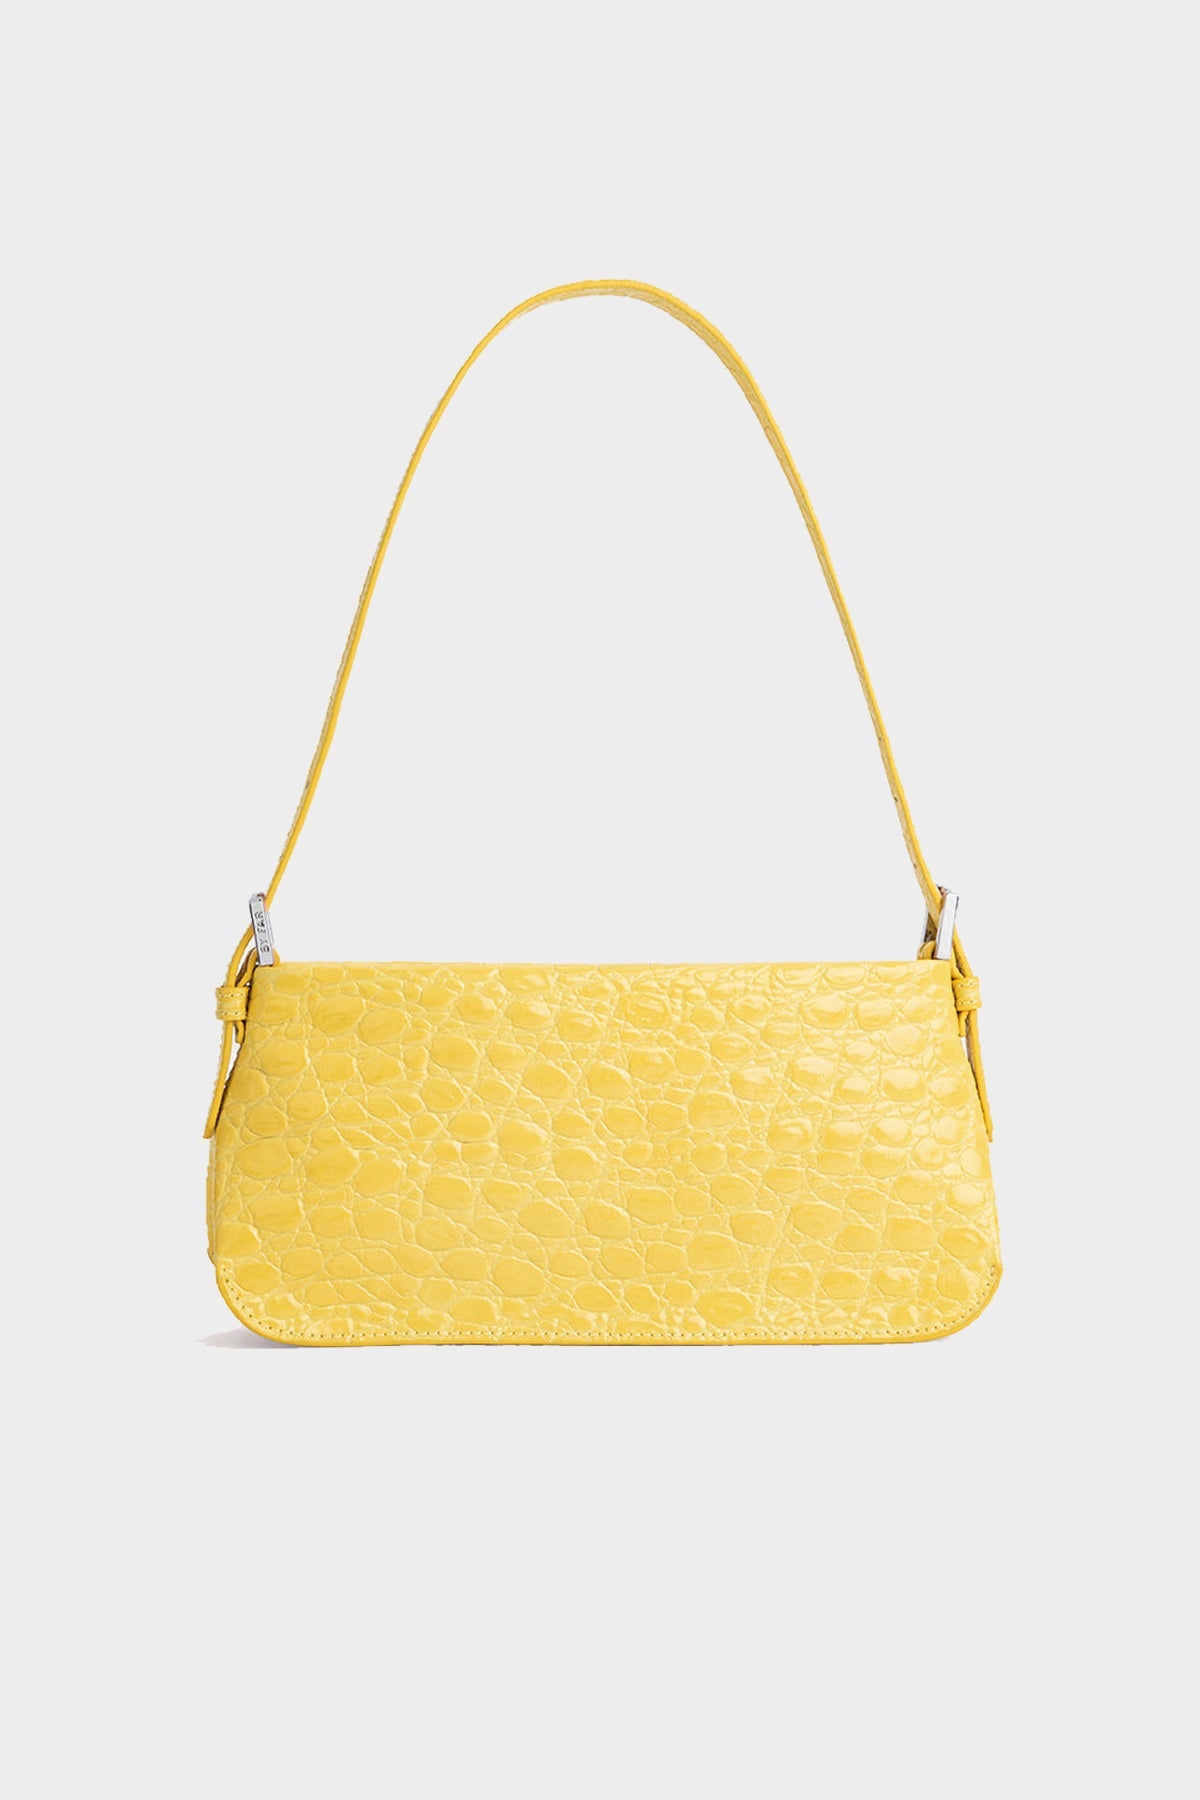 Dulce Duckling Circular Croco Embossed Leather - shop-olivia.com